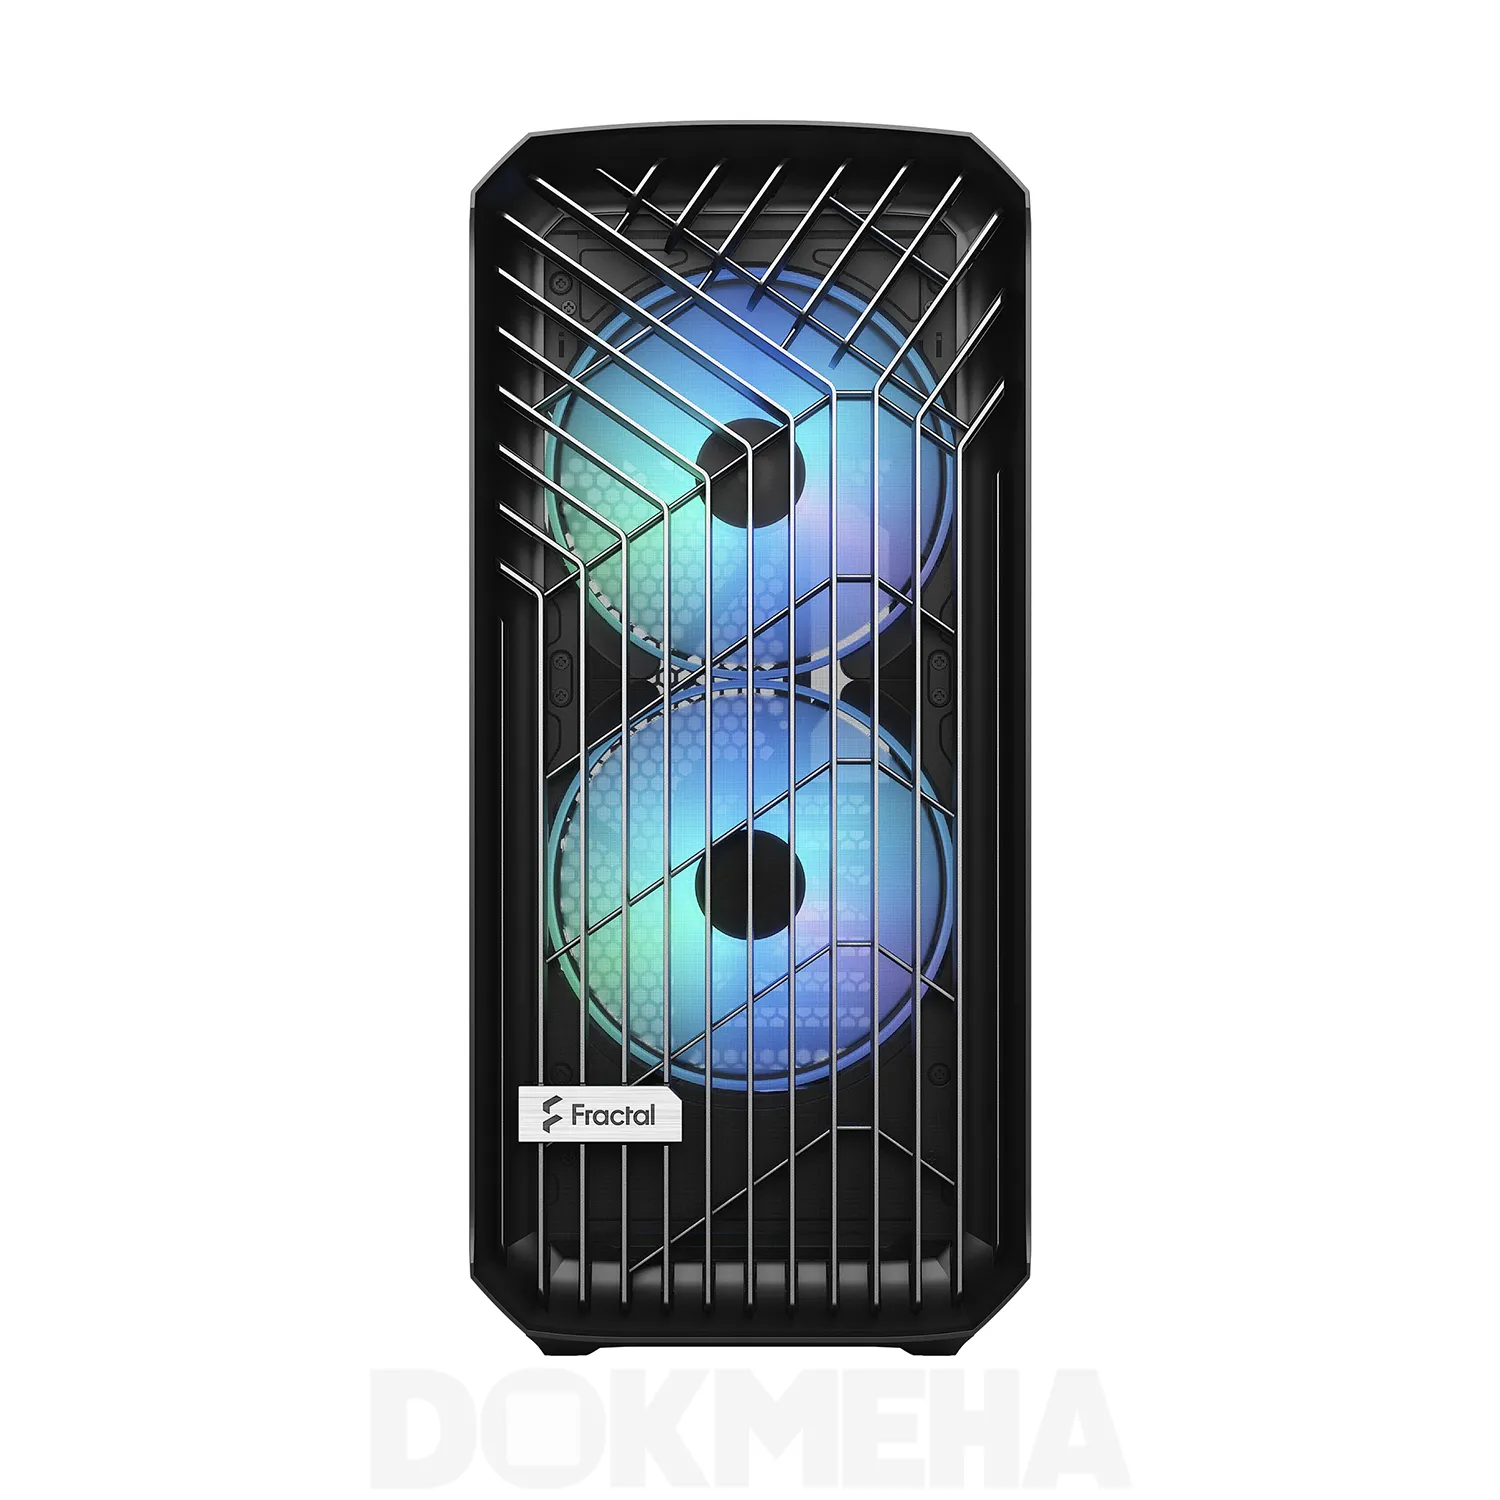 DOKMEHA W10000 Intel Xeon Scalable (3TH GEN) F-Class FULL Tower Workstation -1500 15